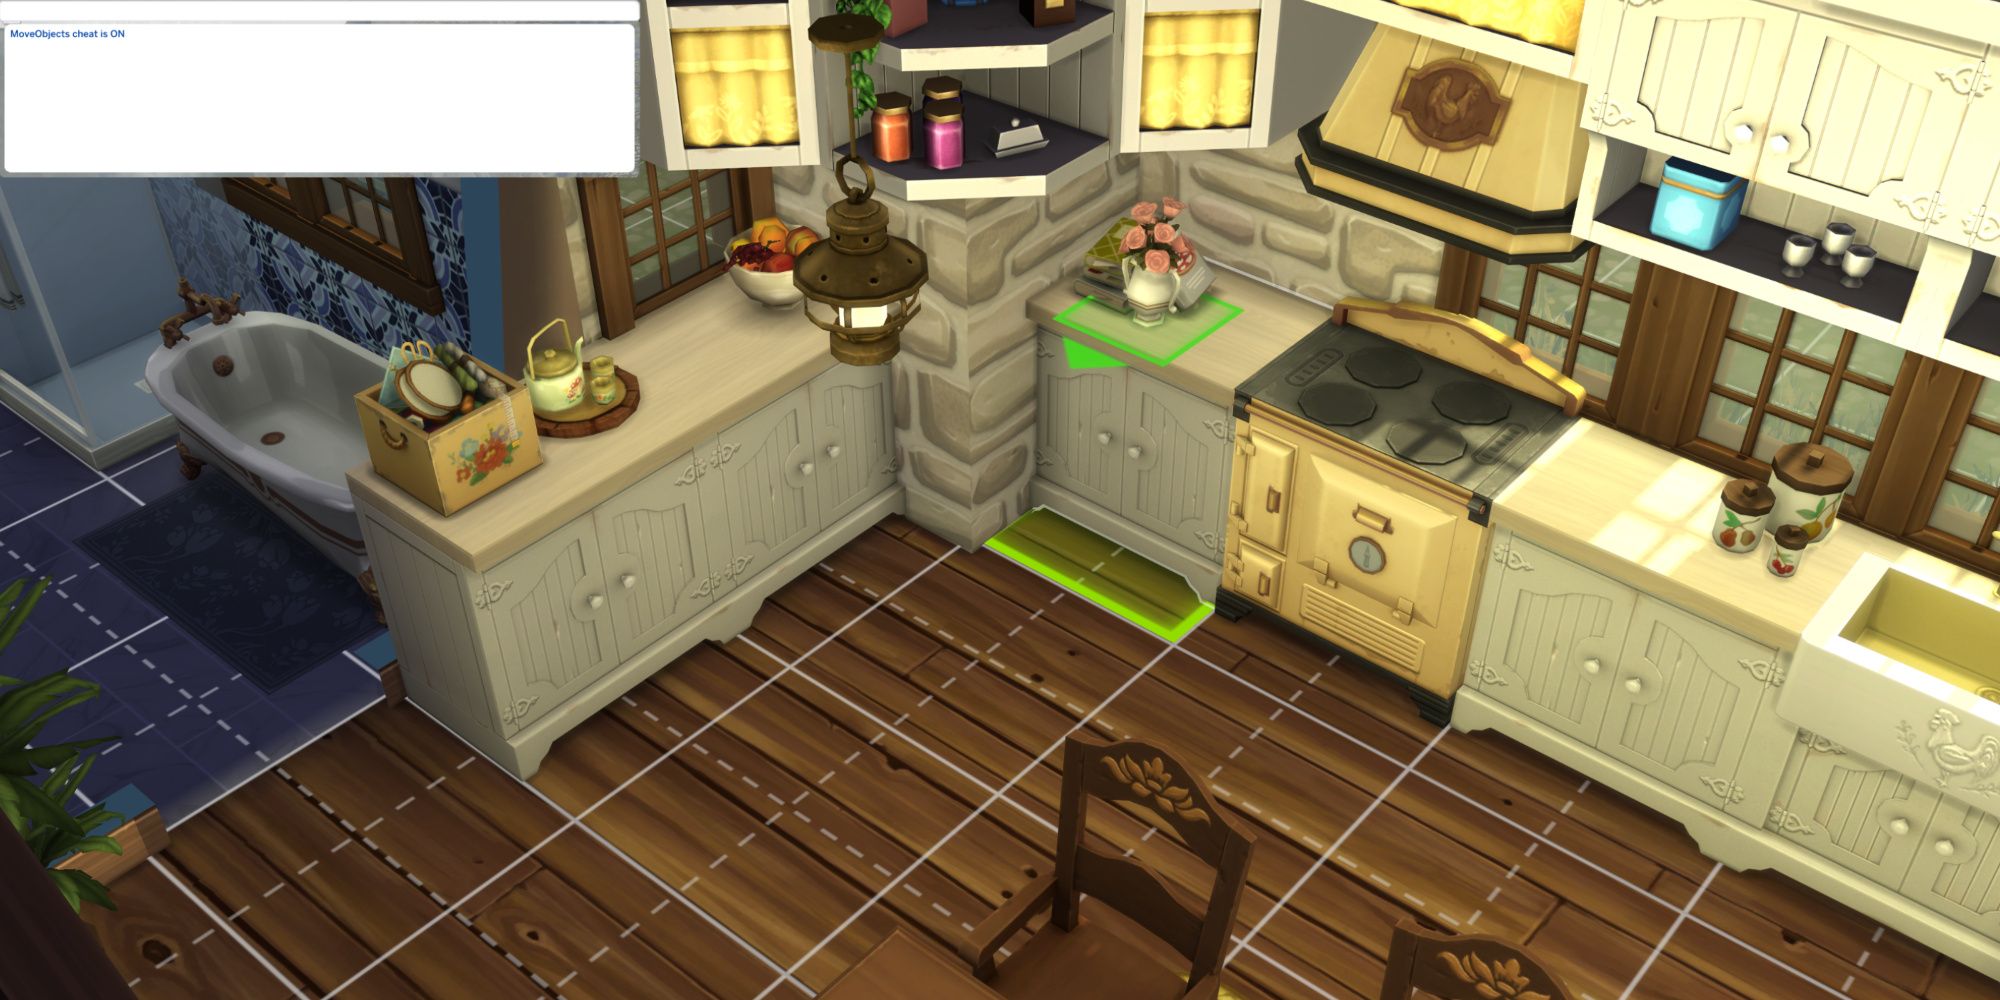 Item placement with moveobjects cheat on in The Sims 4